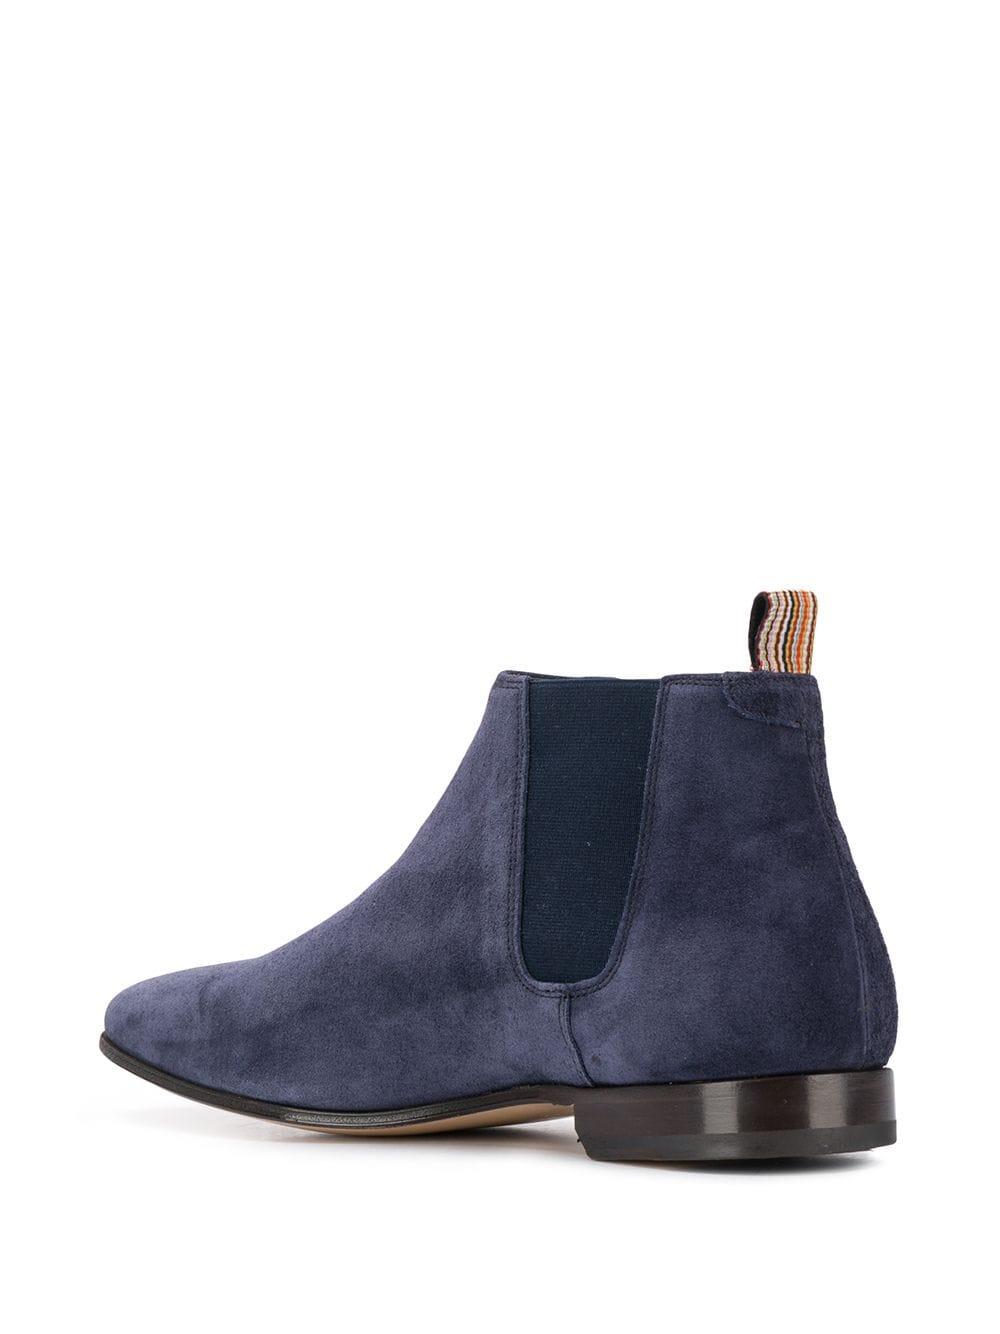 Paul Smith Suede Chelsea Boots in Blue for Men | Lyst